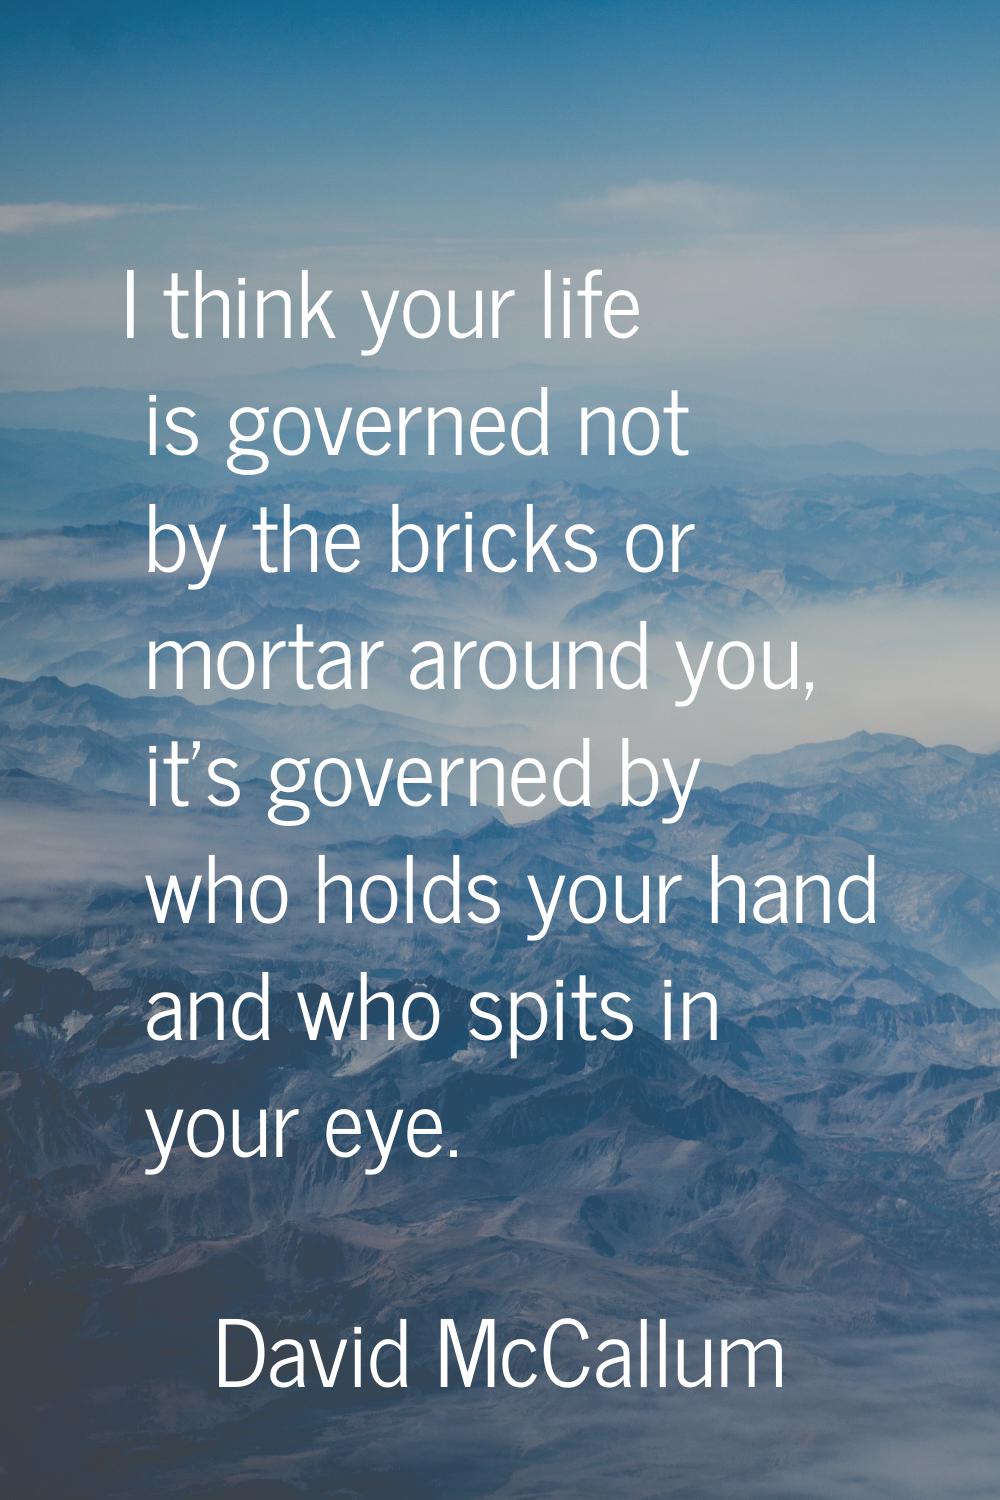 I think your life is governed not by the bricks or mortar around you, it's governed by who holds yo